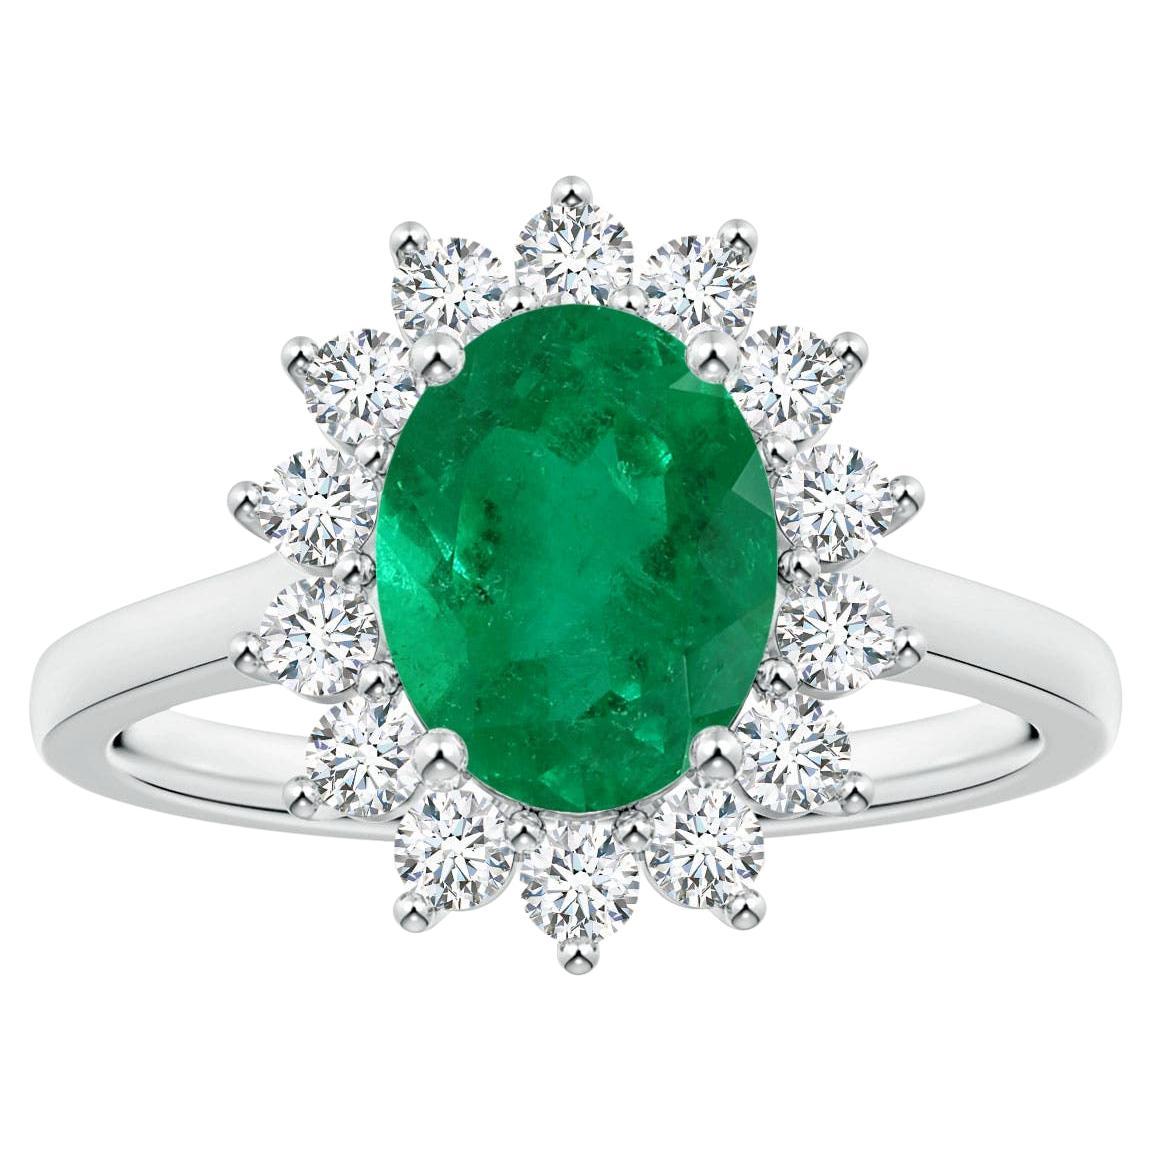 For Sale:  Angara Gia Certified Oval Columbian Emerald Halo Ring in Platinum